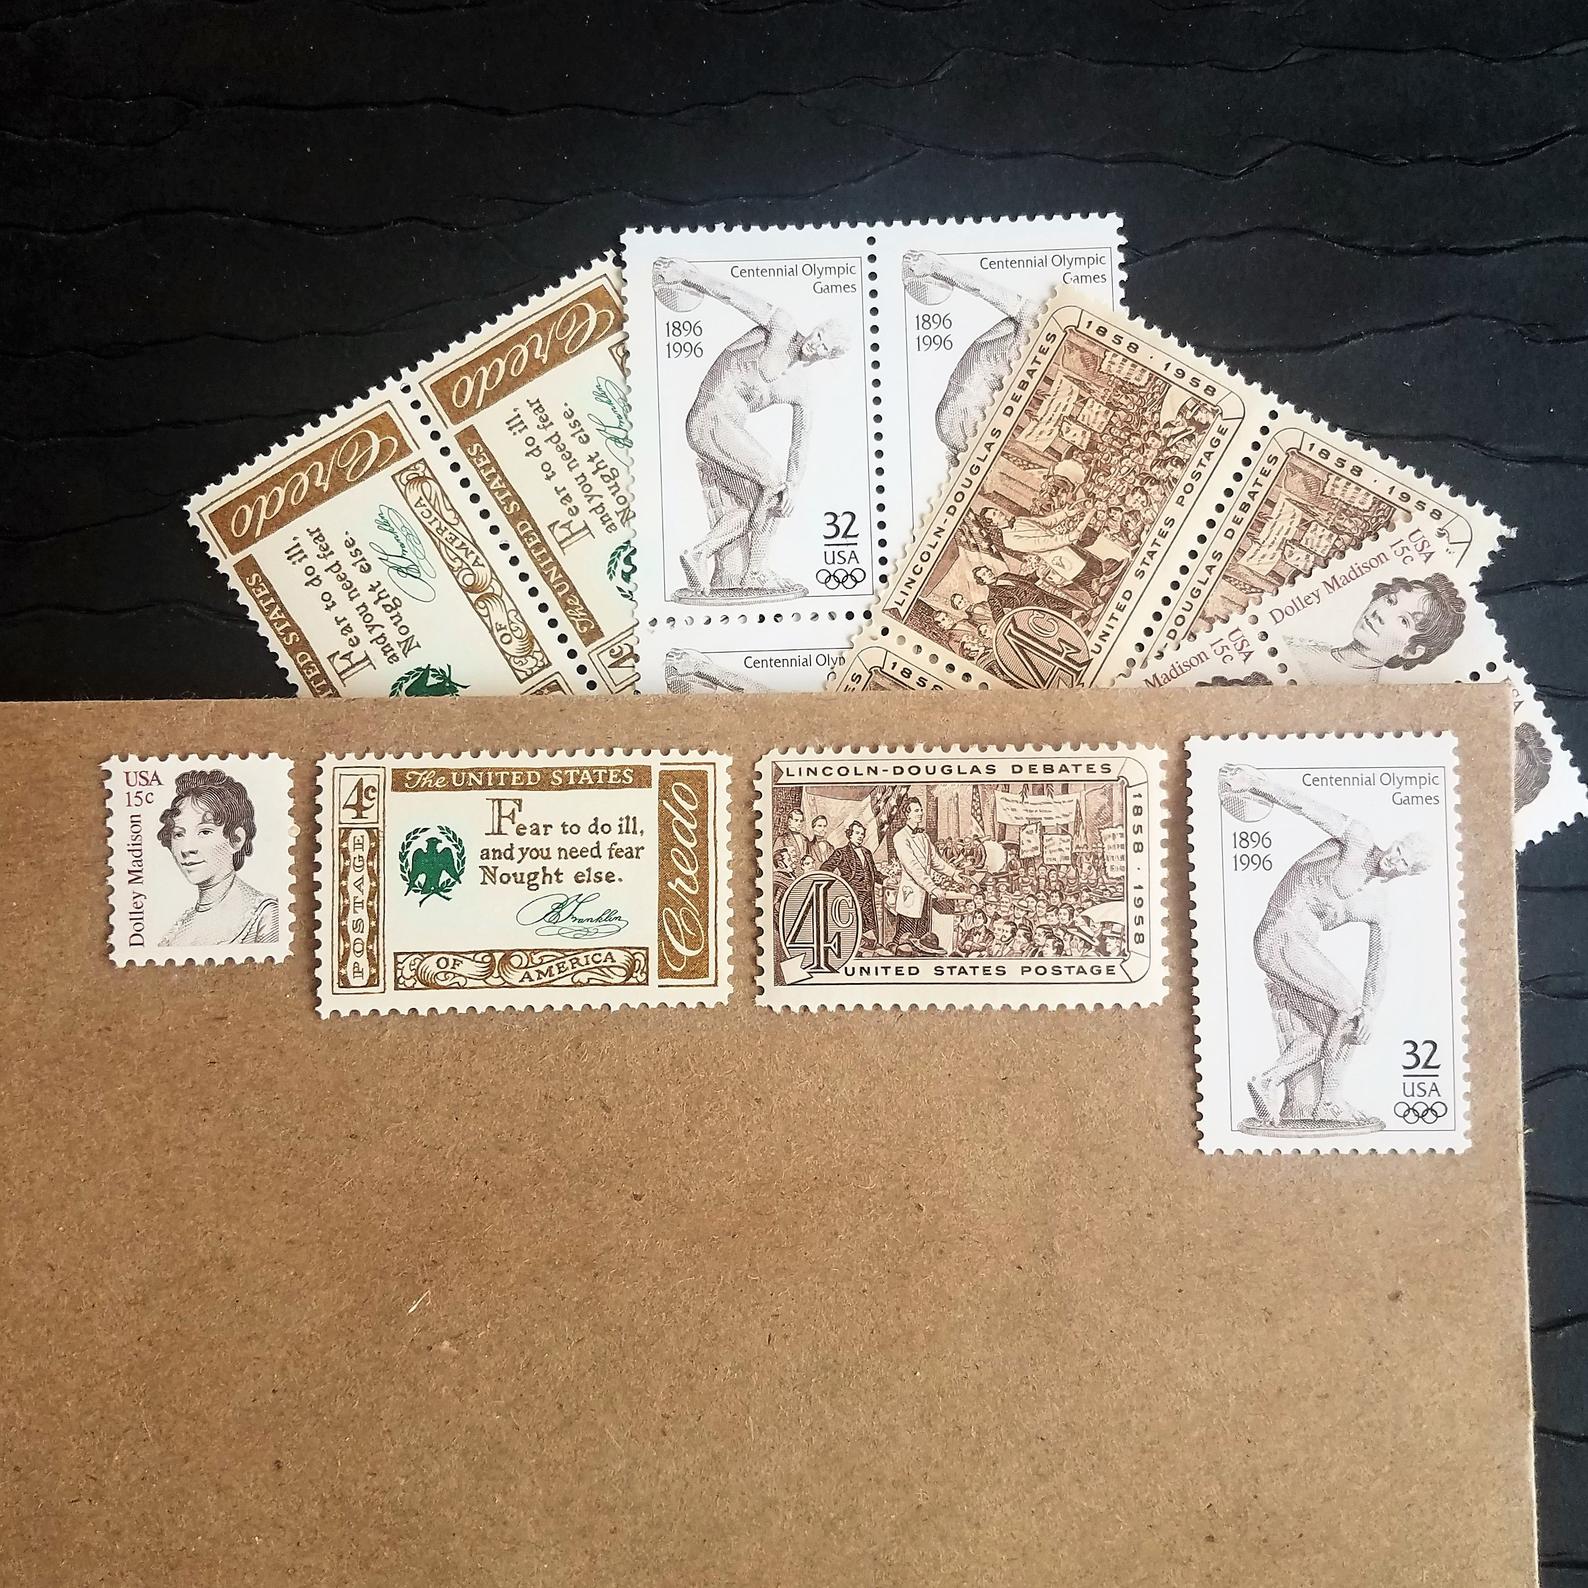 Comparing Wedding Postage Options  Standard USPS Postage, Custom Postage,  and Vintage Postage Stamps — Simply Jessica Marie